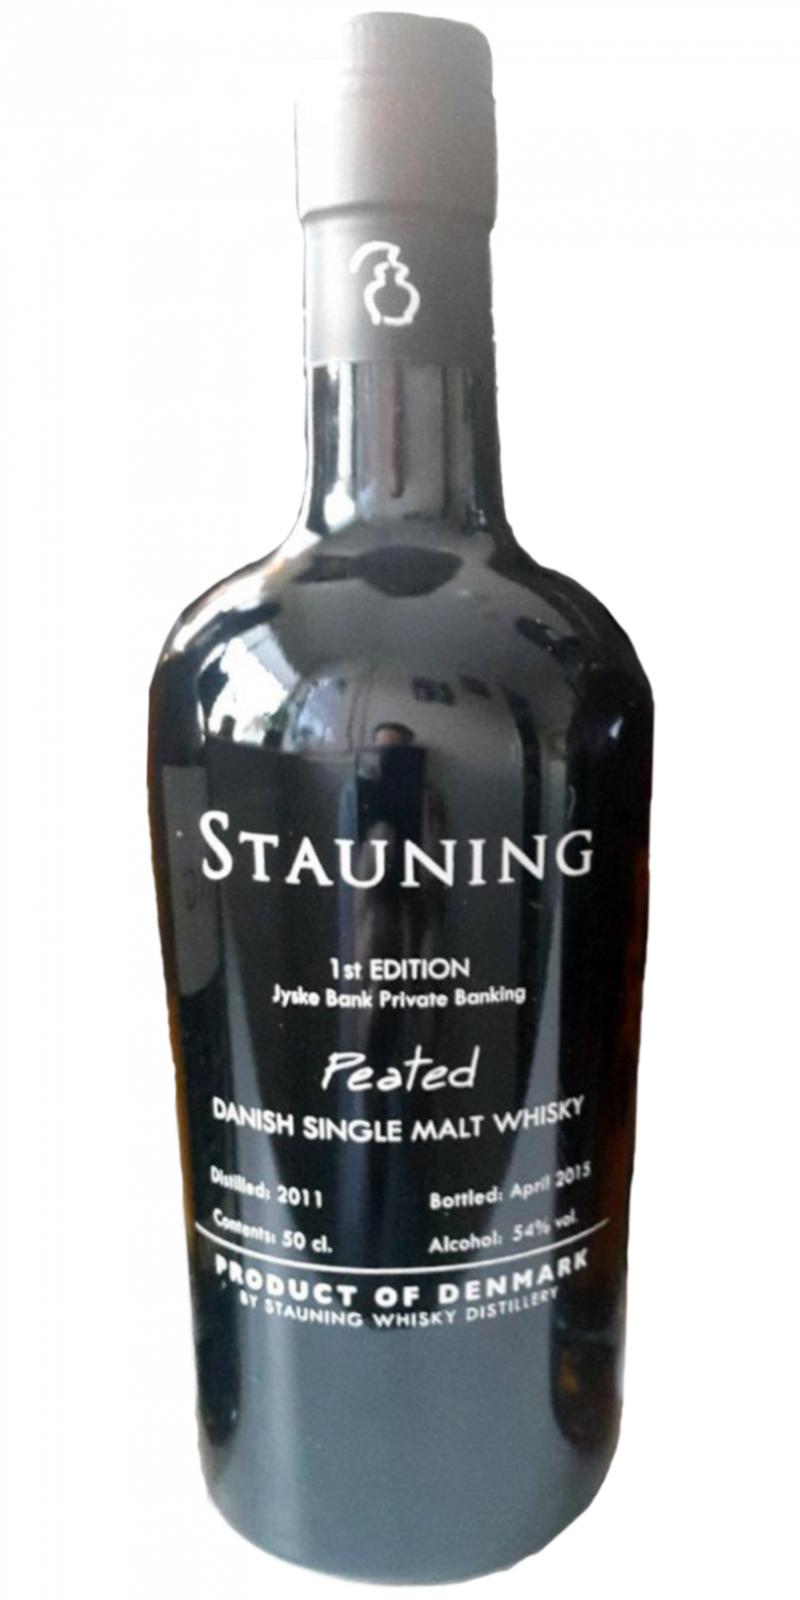 Stauning 2011 Peated 1st Edition Jyske Bank Private Banking 54% 500ml